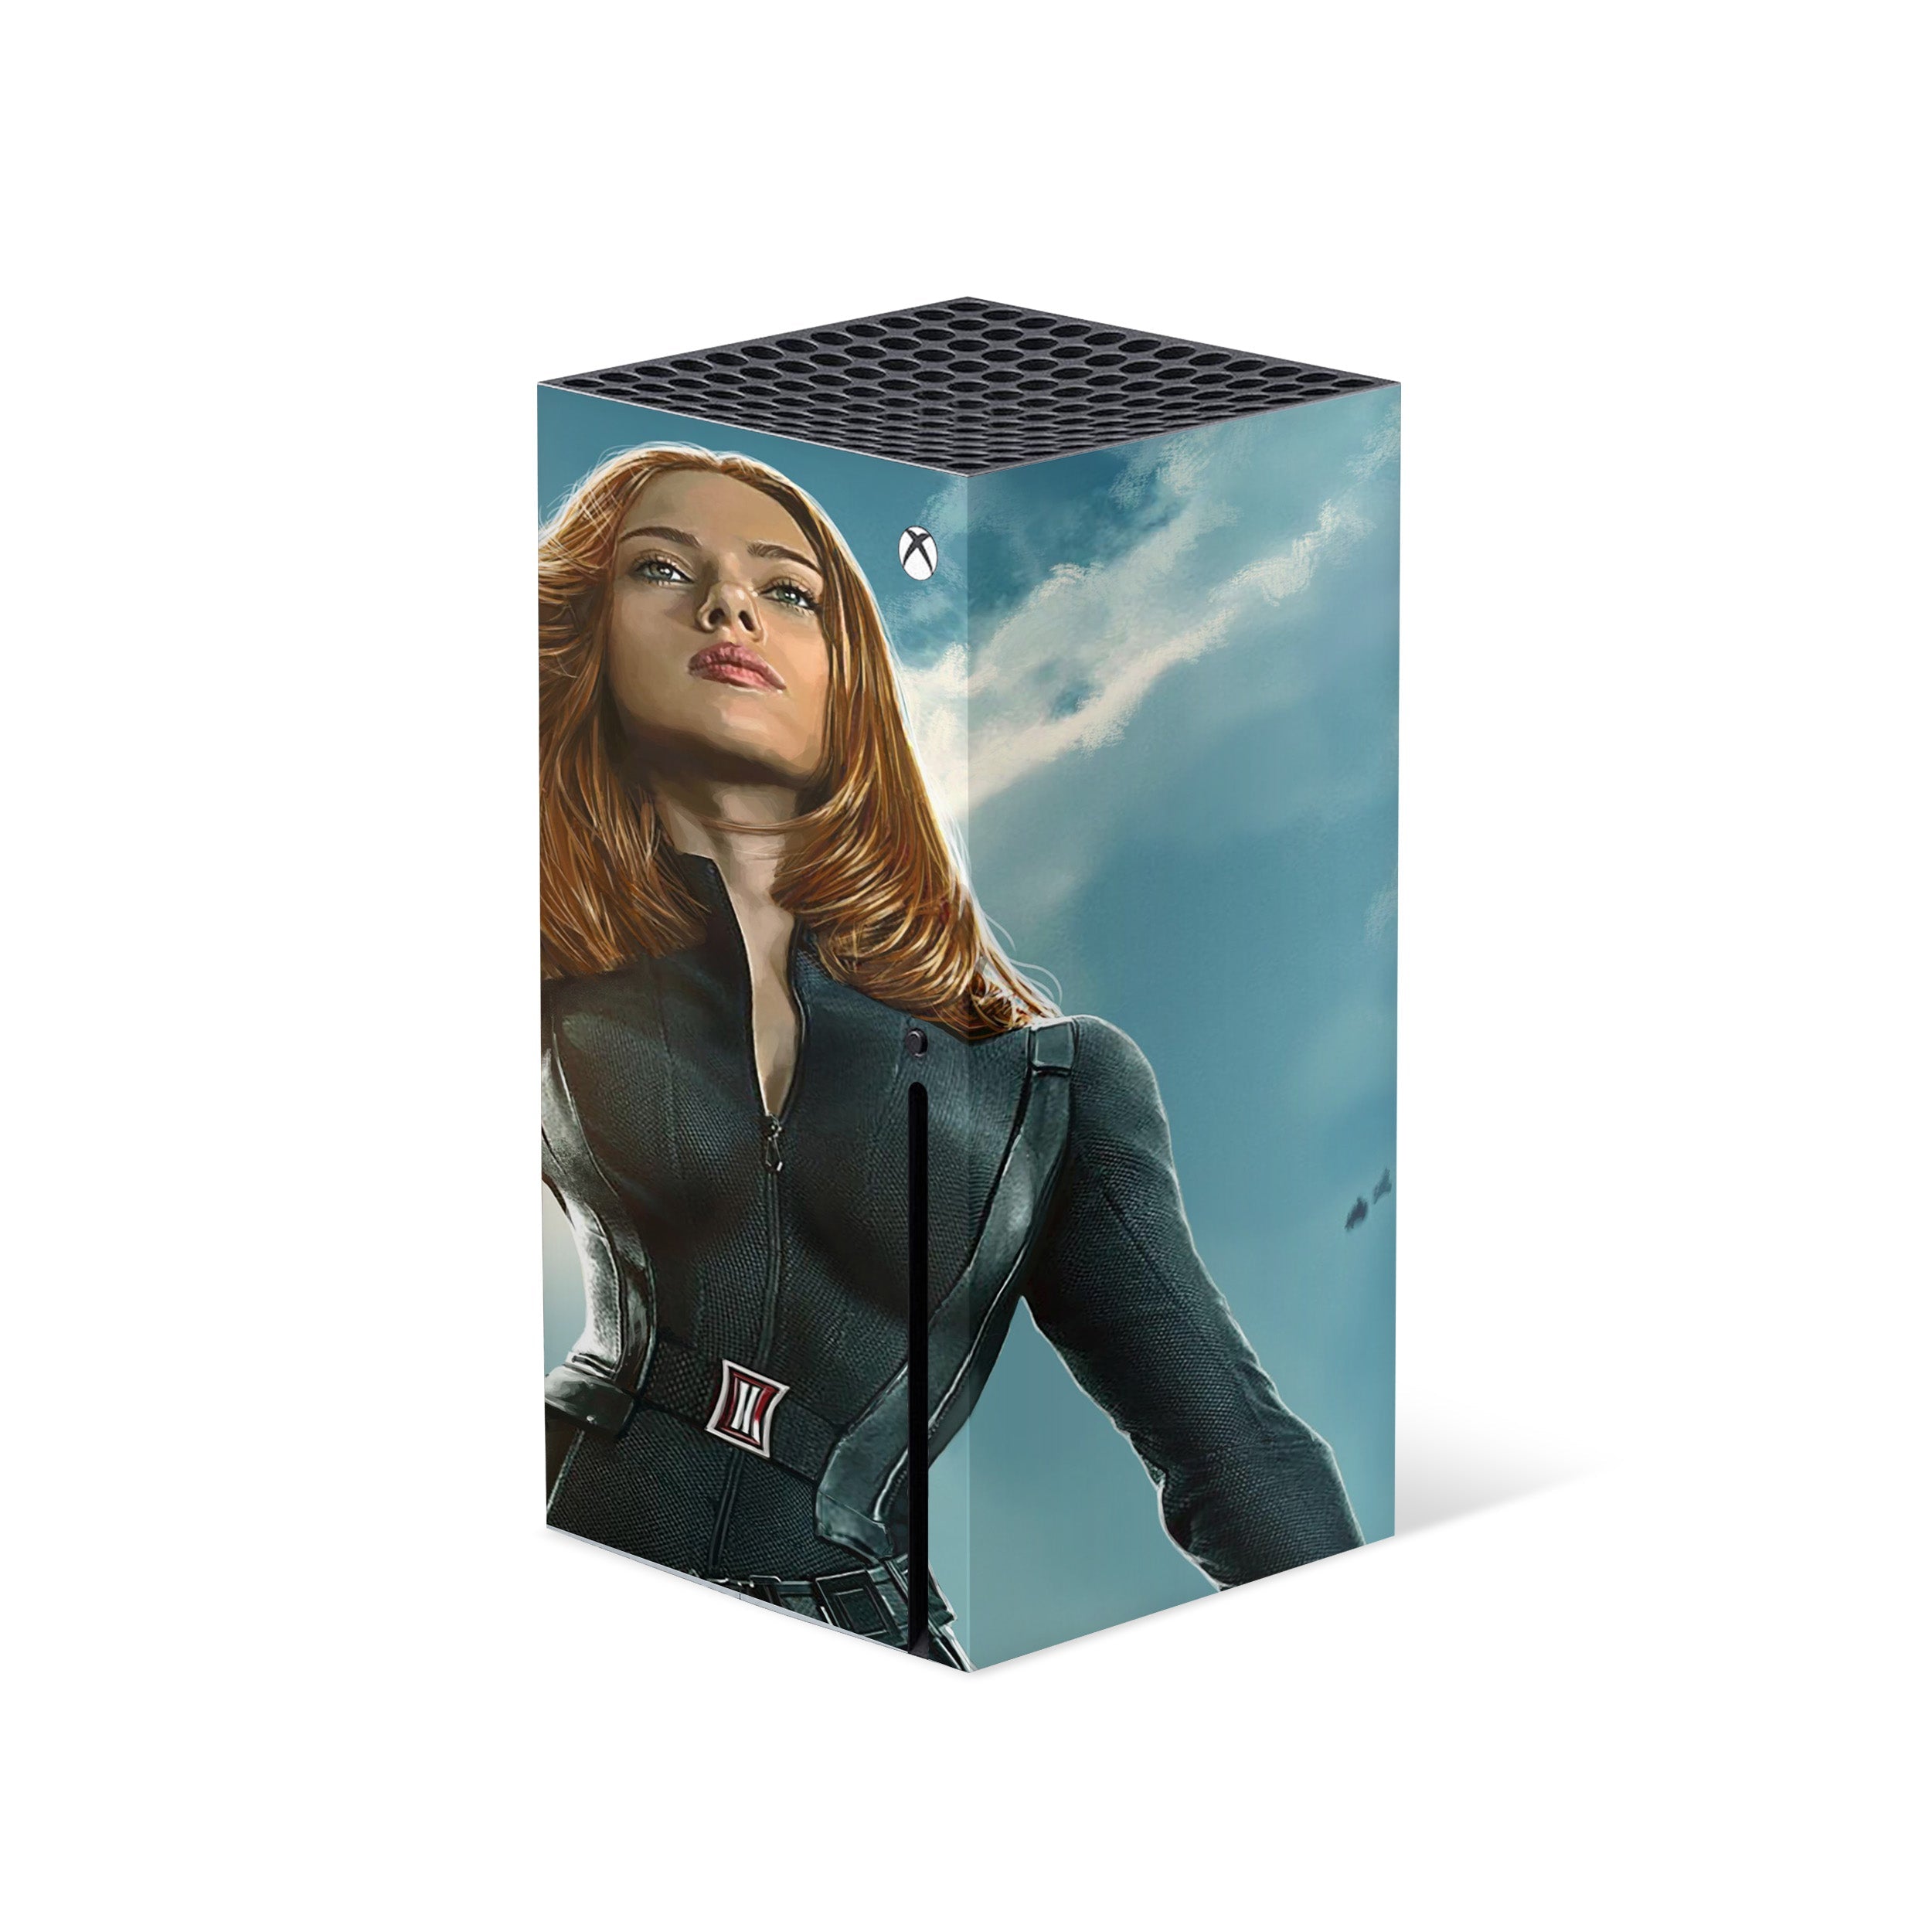 A video game skin featuring a Marvel Black Widow design for the Xbox Series X.